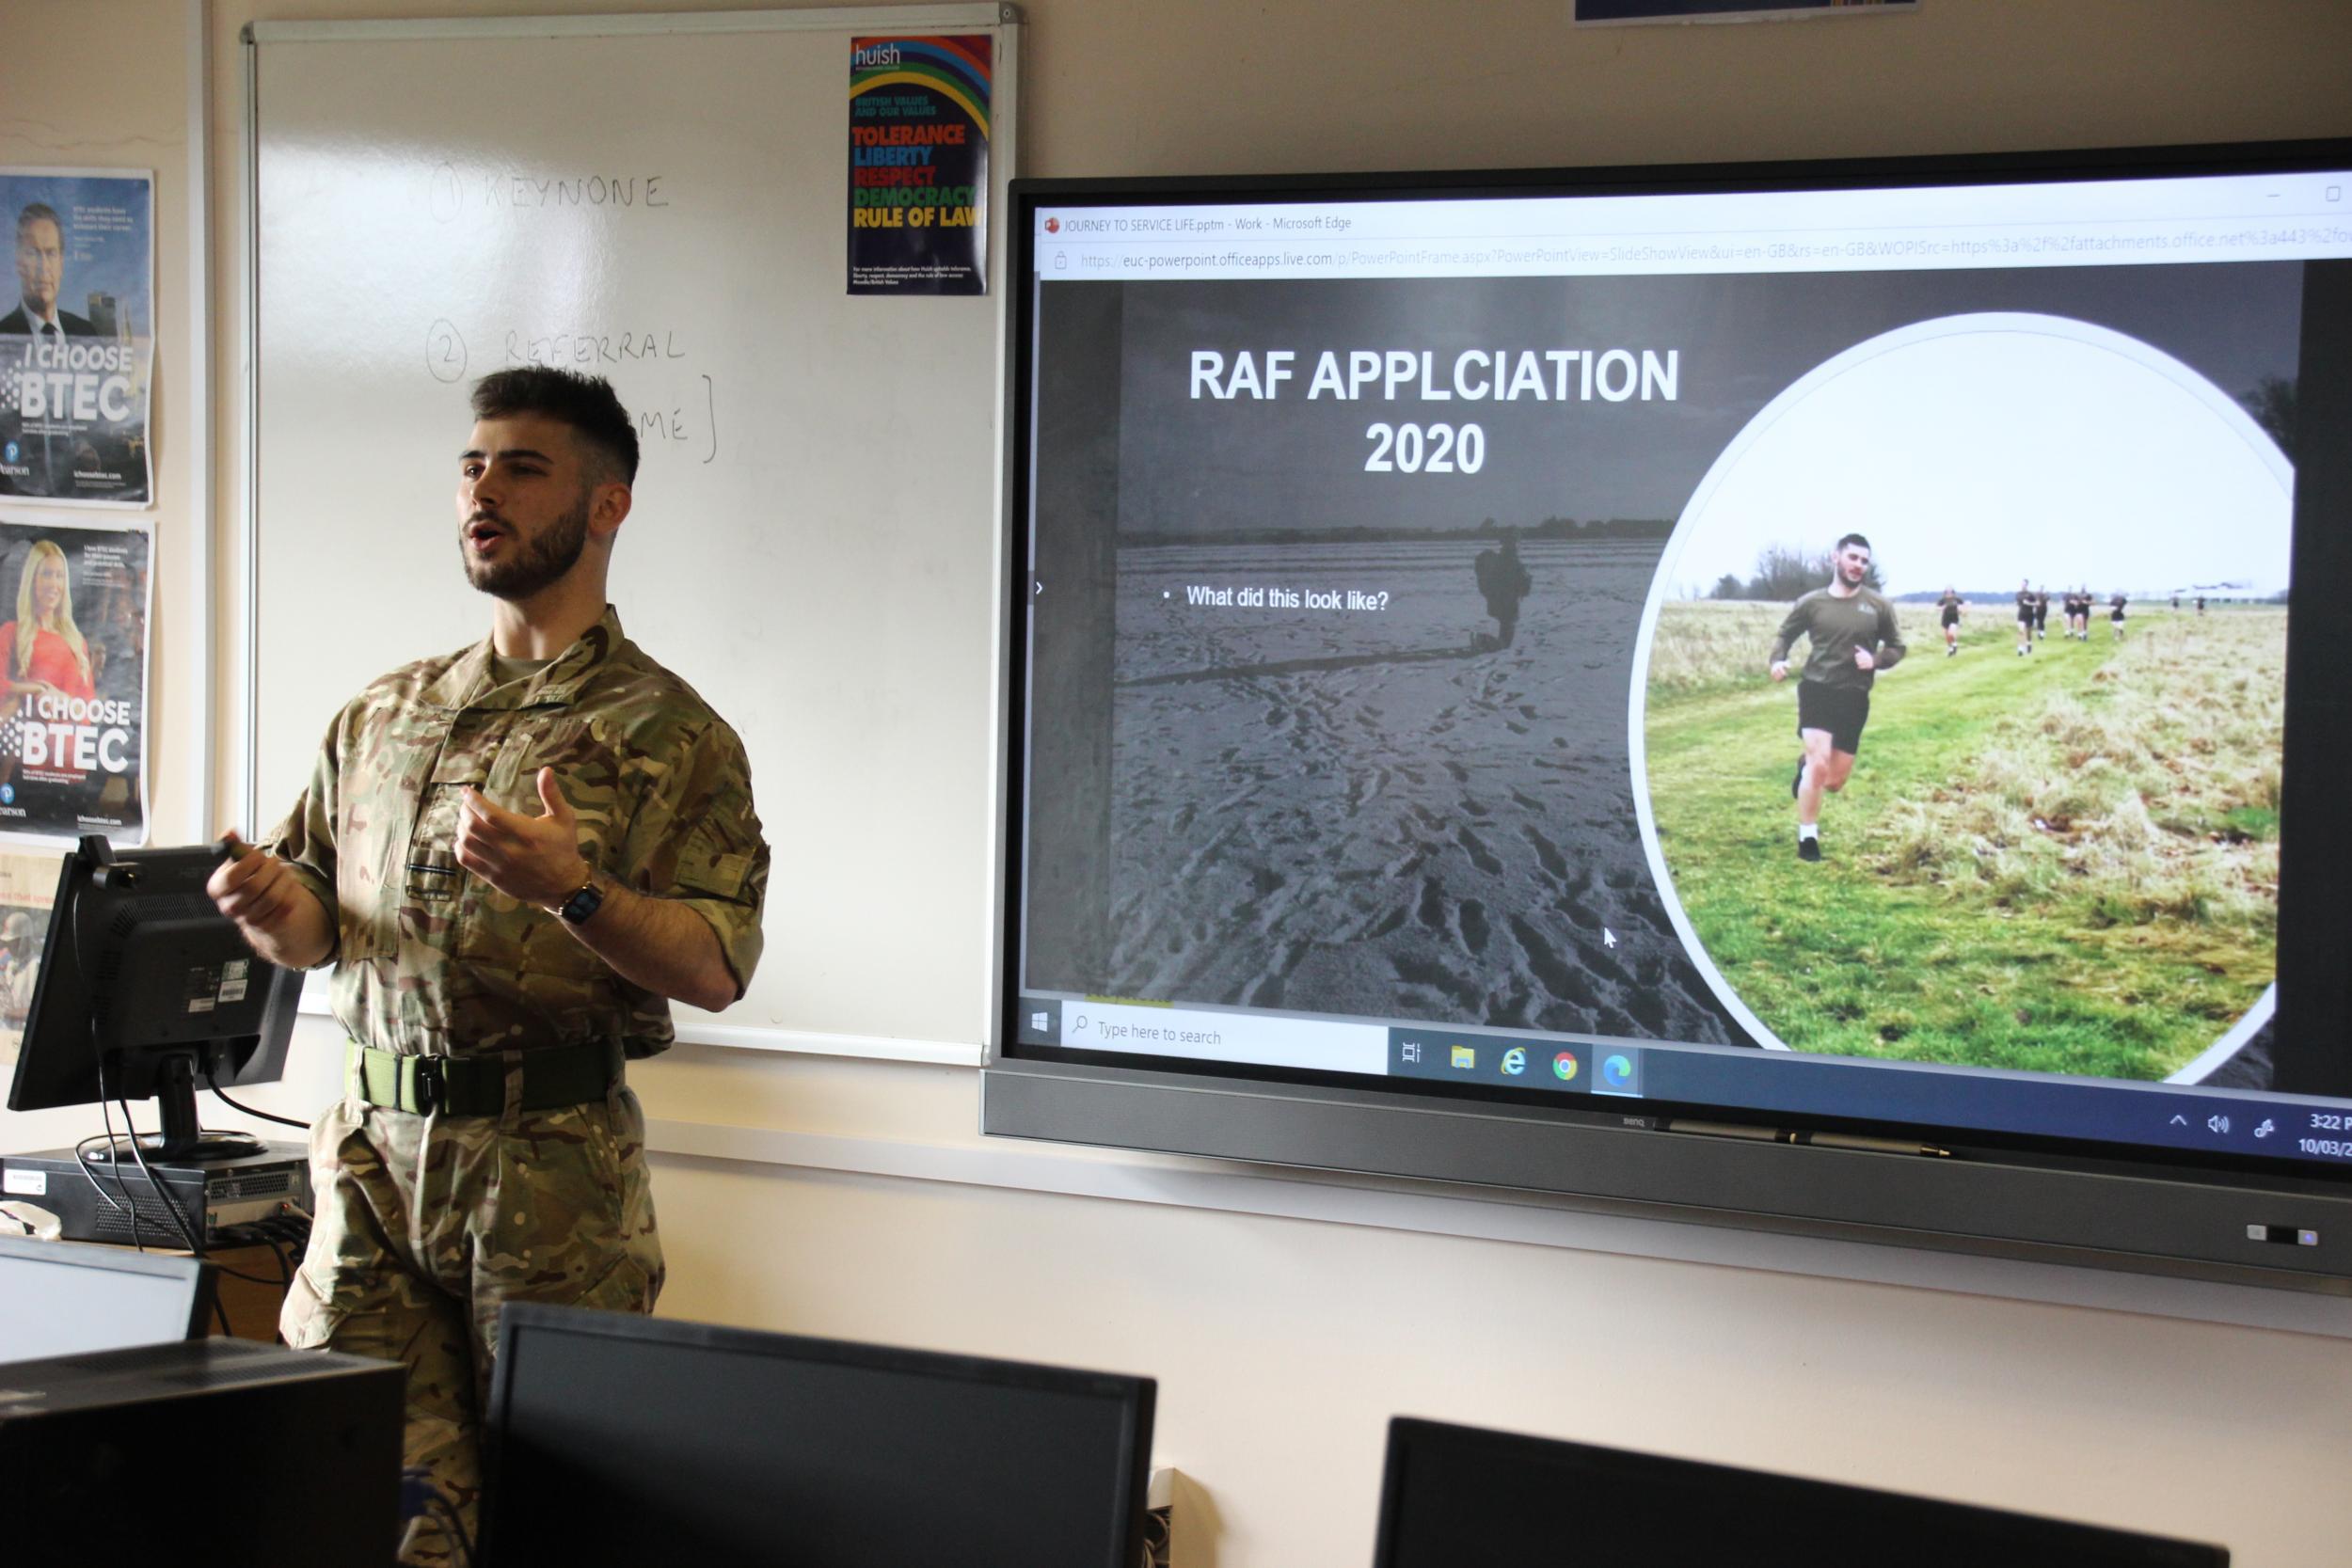 RAF officer in camo clothing speaking to class